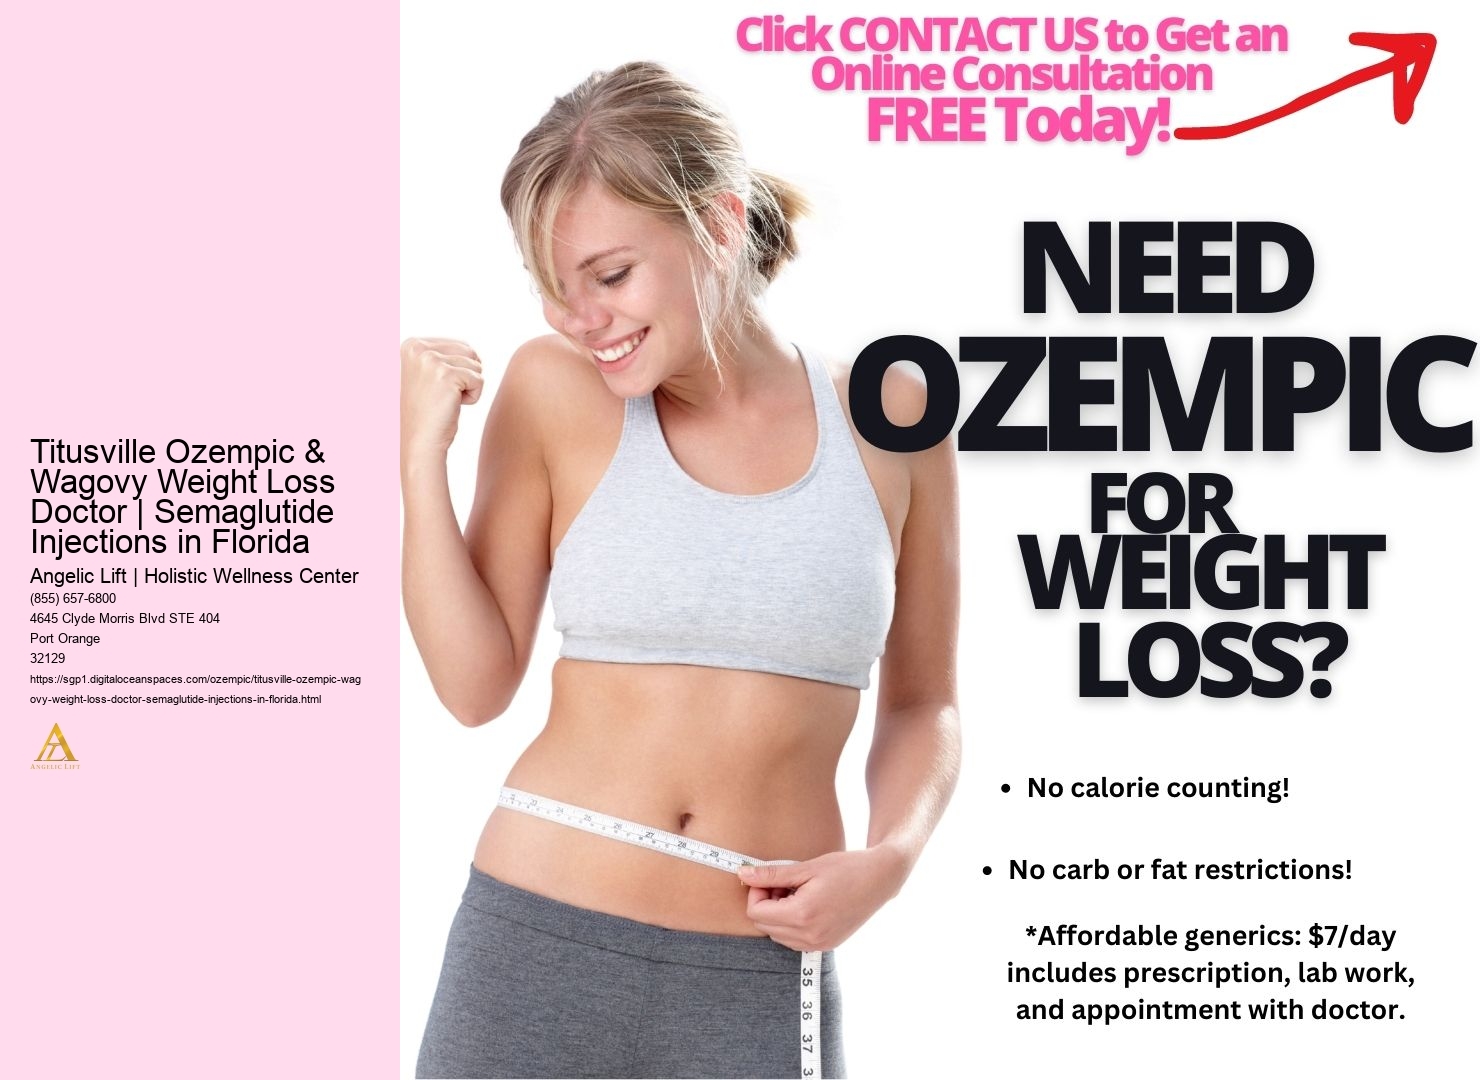 Titusville Ozempic & Wagovy Weight Loss Doctor | Semaglutide Injections in Florida